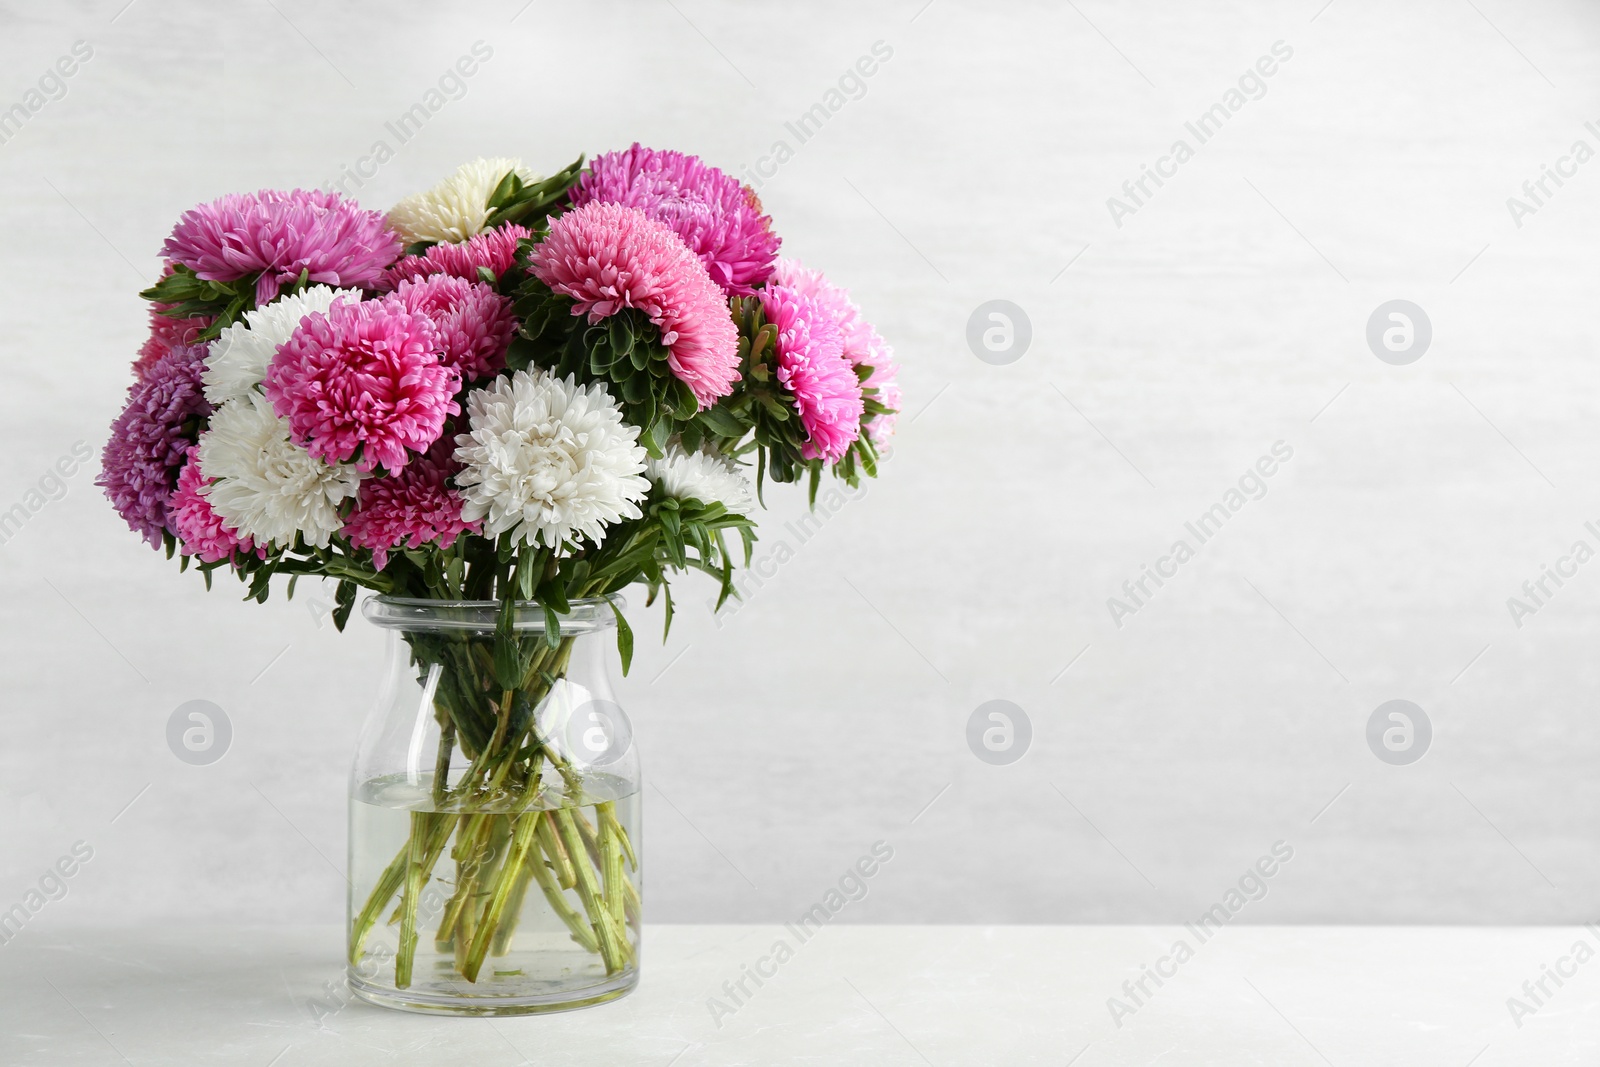 Photo of Beautiful asters in vase on table against white background, space for text. Autumn flowers